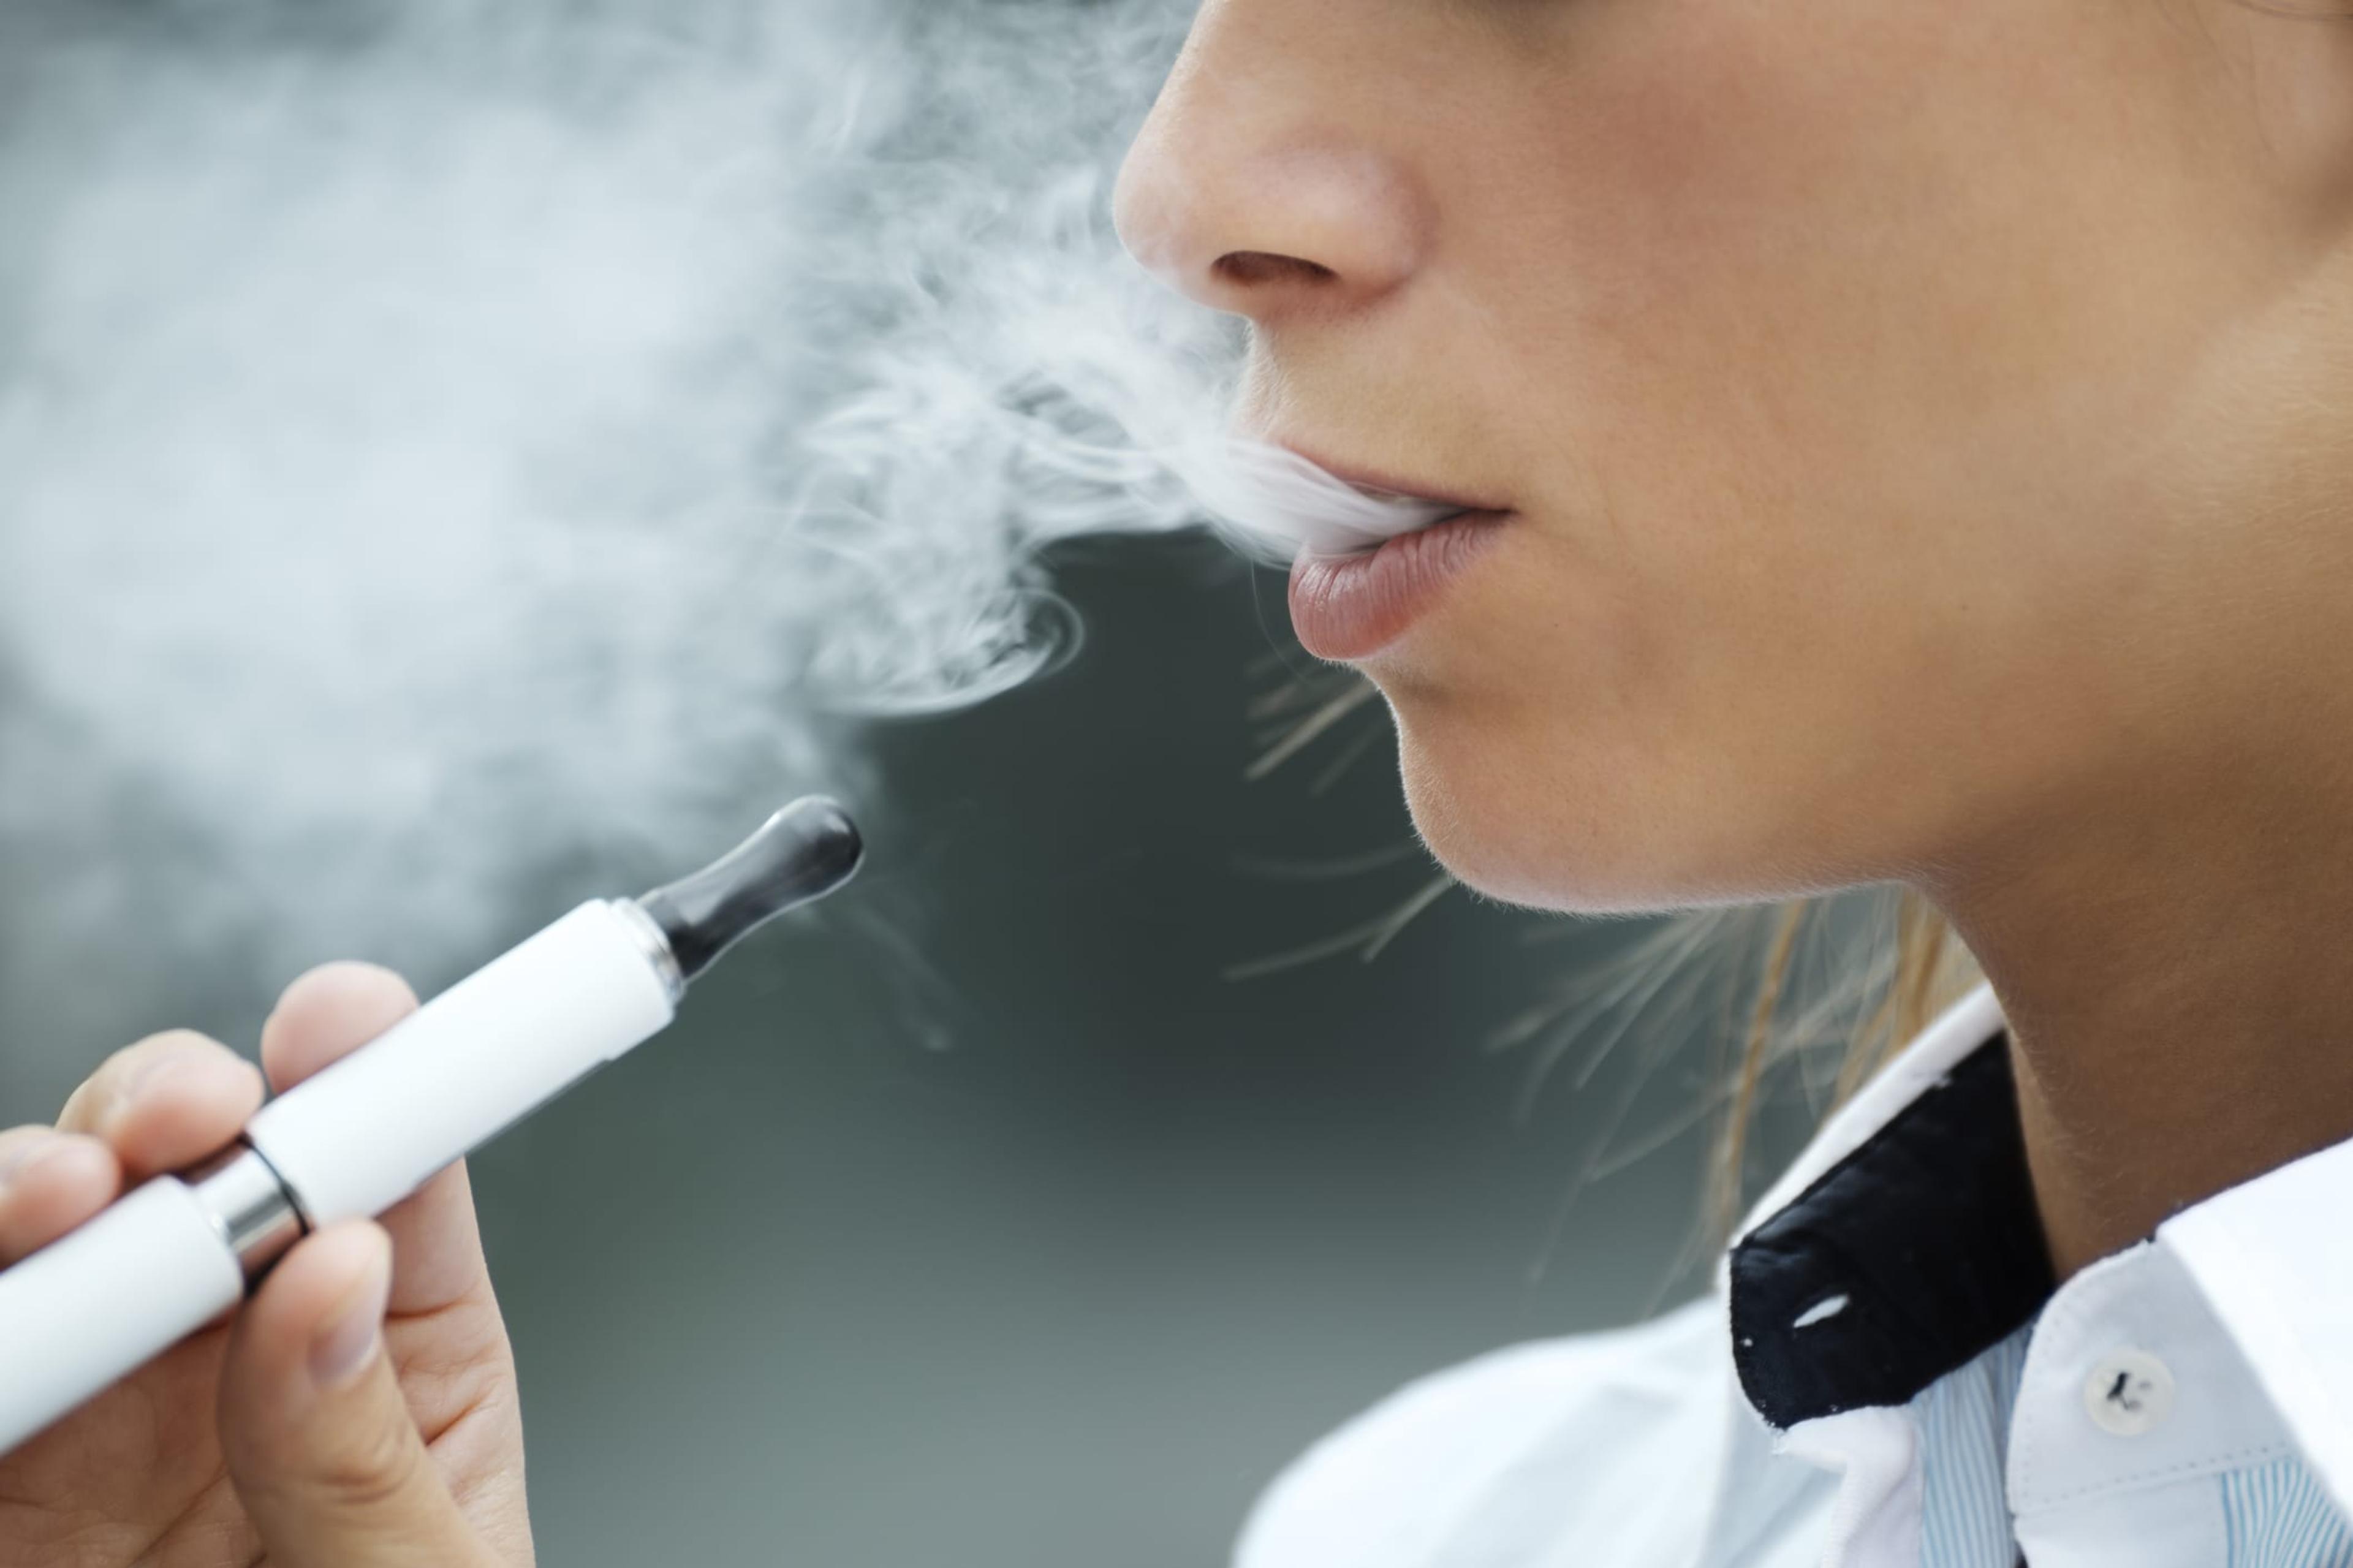 Woman using an electronic cigarette and blowing a cloud of vapor